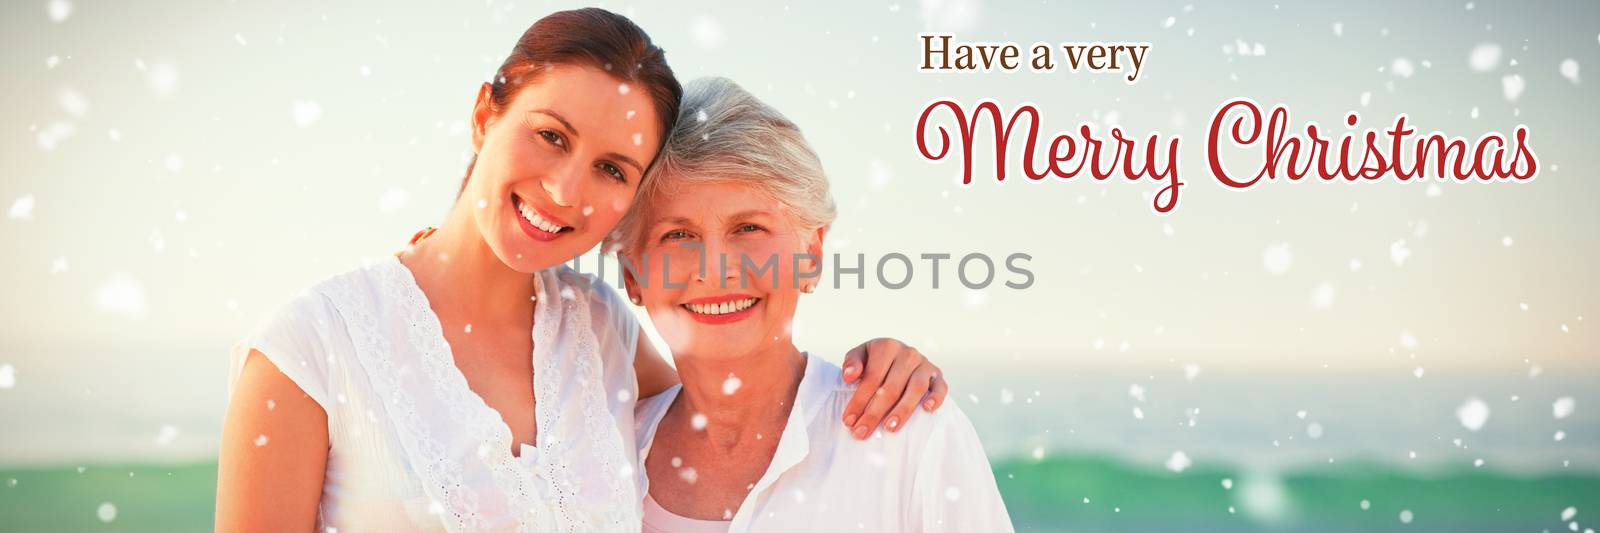 Christmas card against happy family posing together